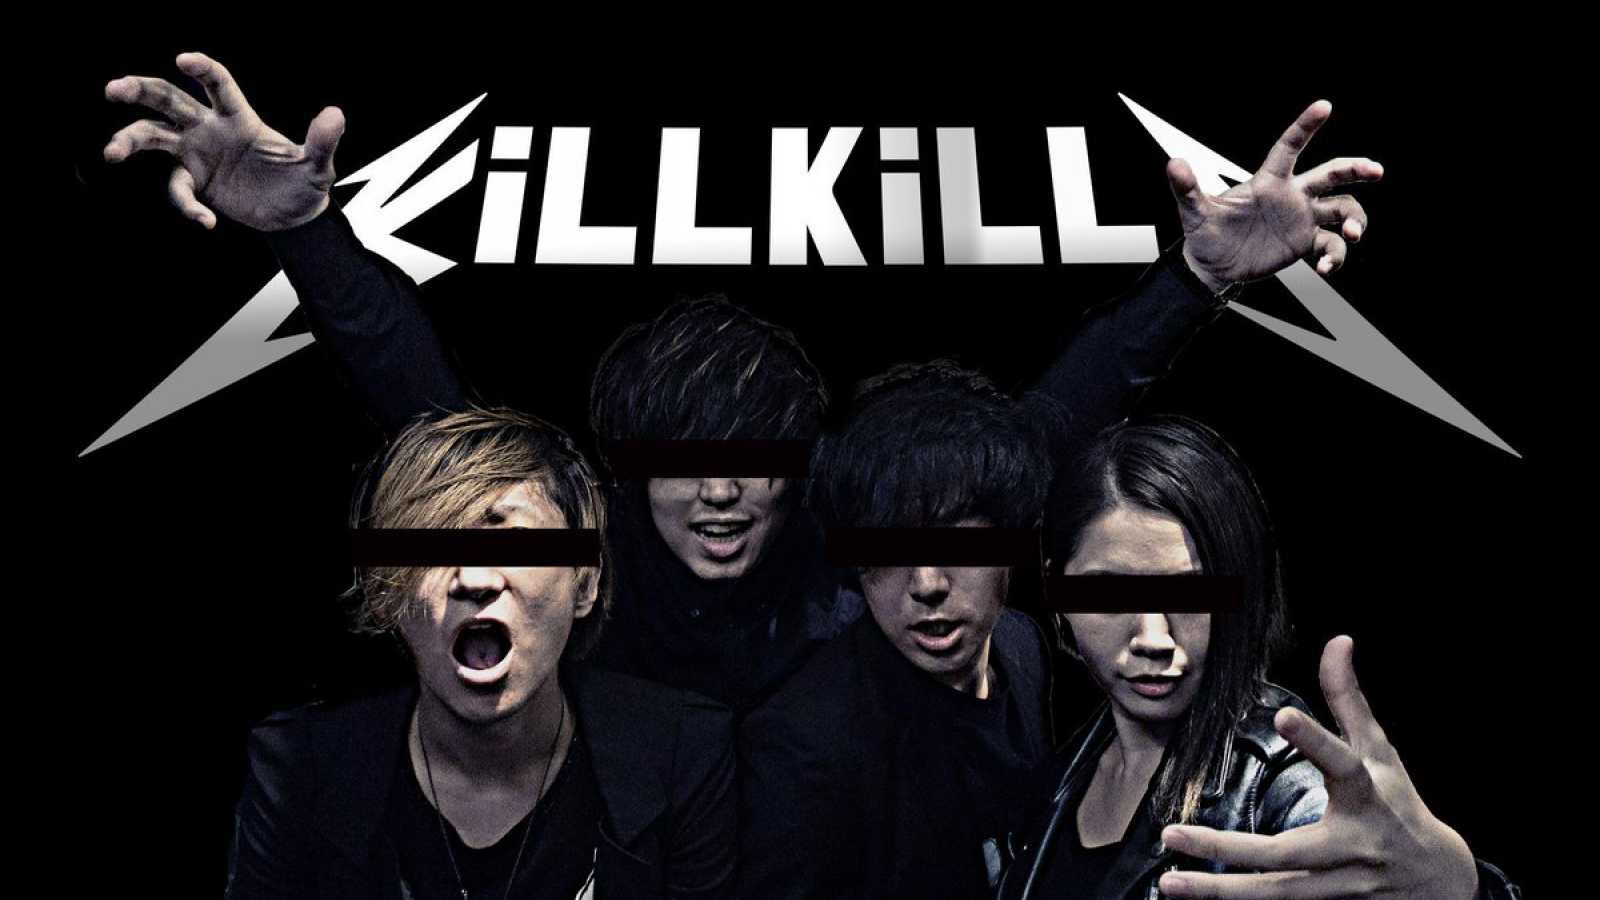 KiLLKiLLS' New Single "Crucify" Available on Streaming Services Worldwide © Splatter Records